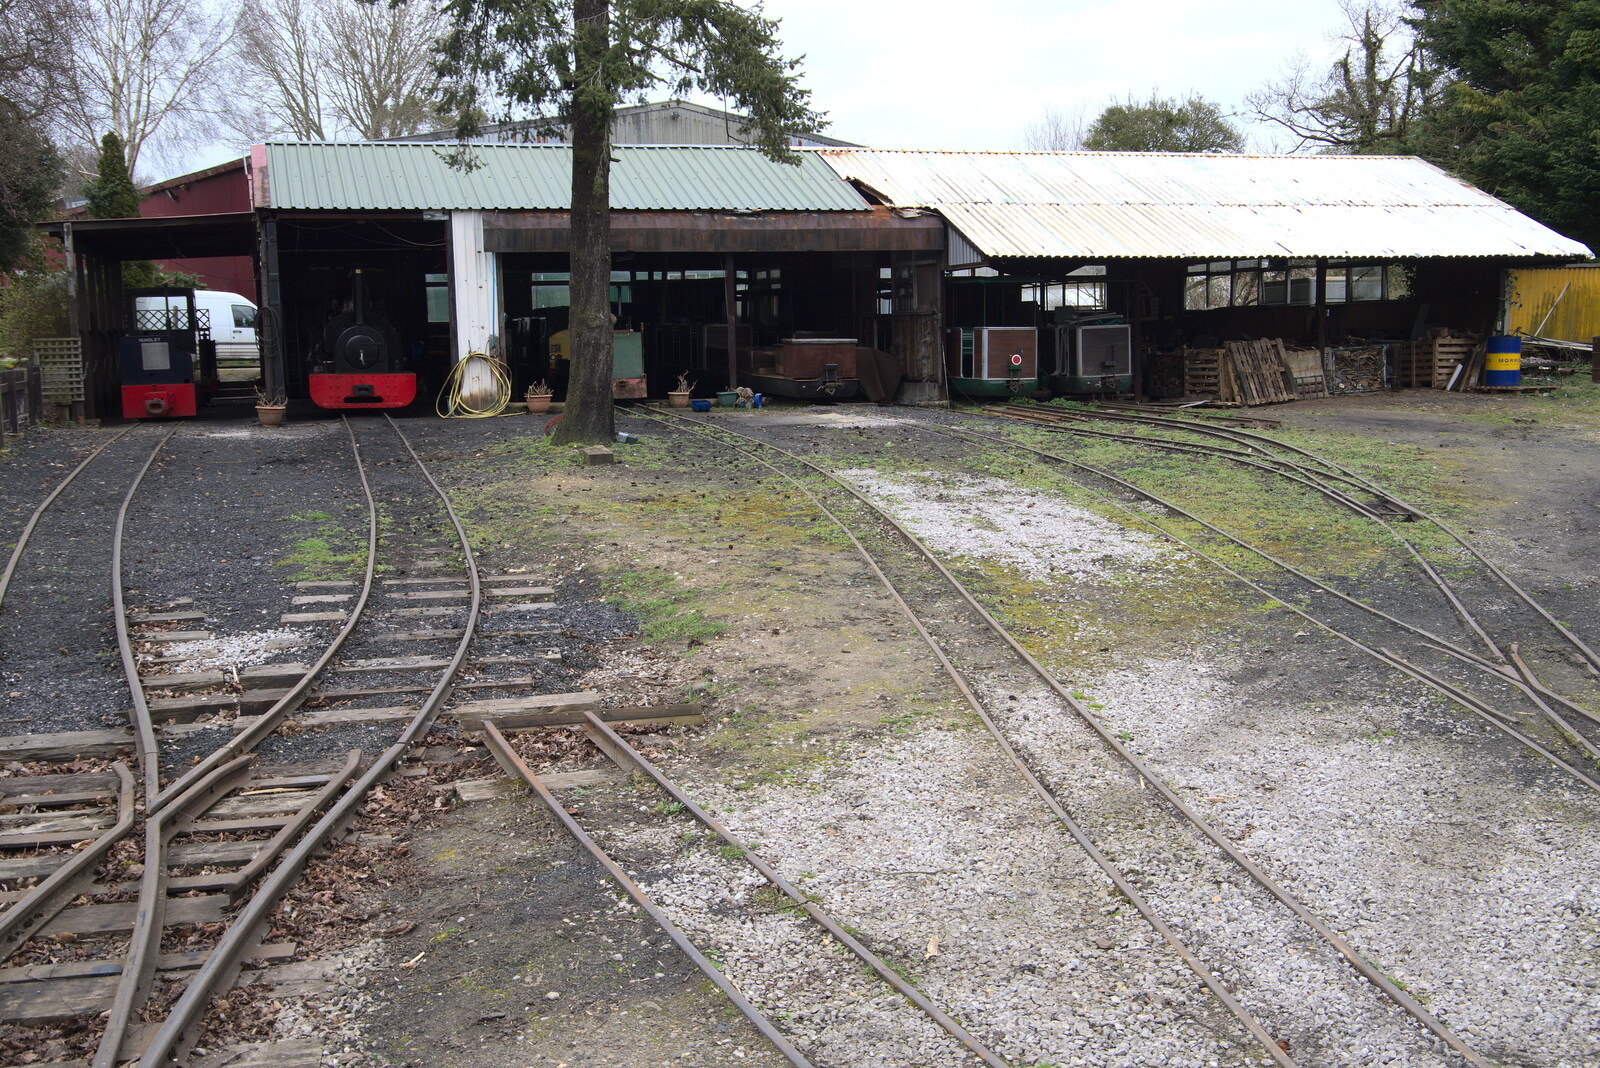 Tracks snake out of the engine shed from A Return to Bressingham Steam and Gardens, Bressingham, Norfolk - 28th March 2021